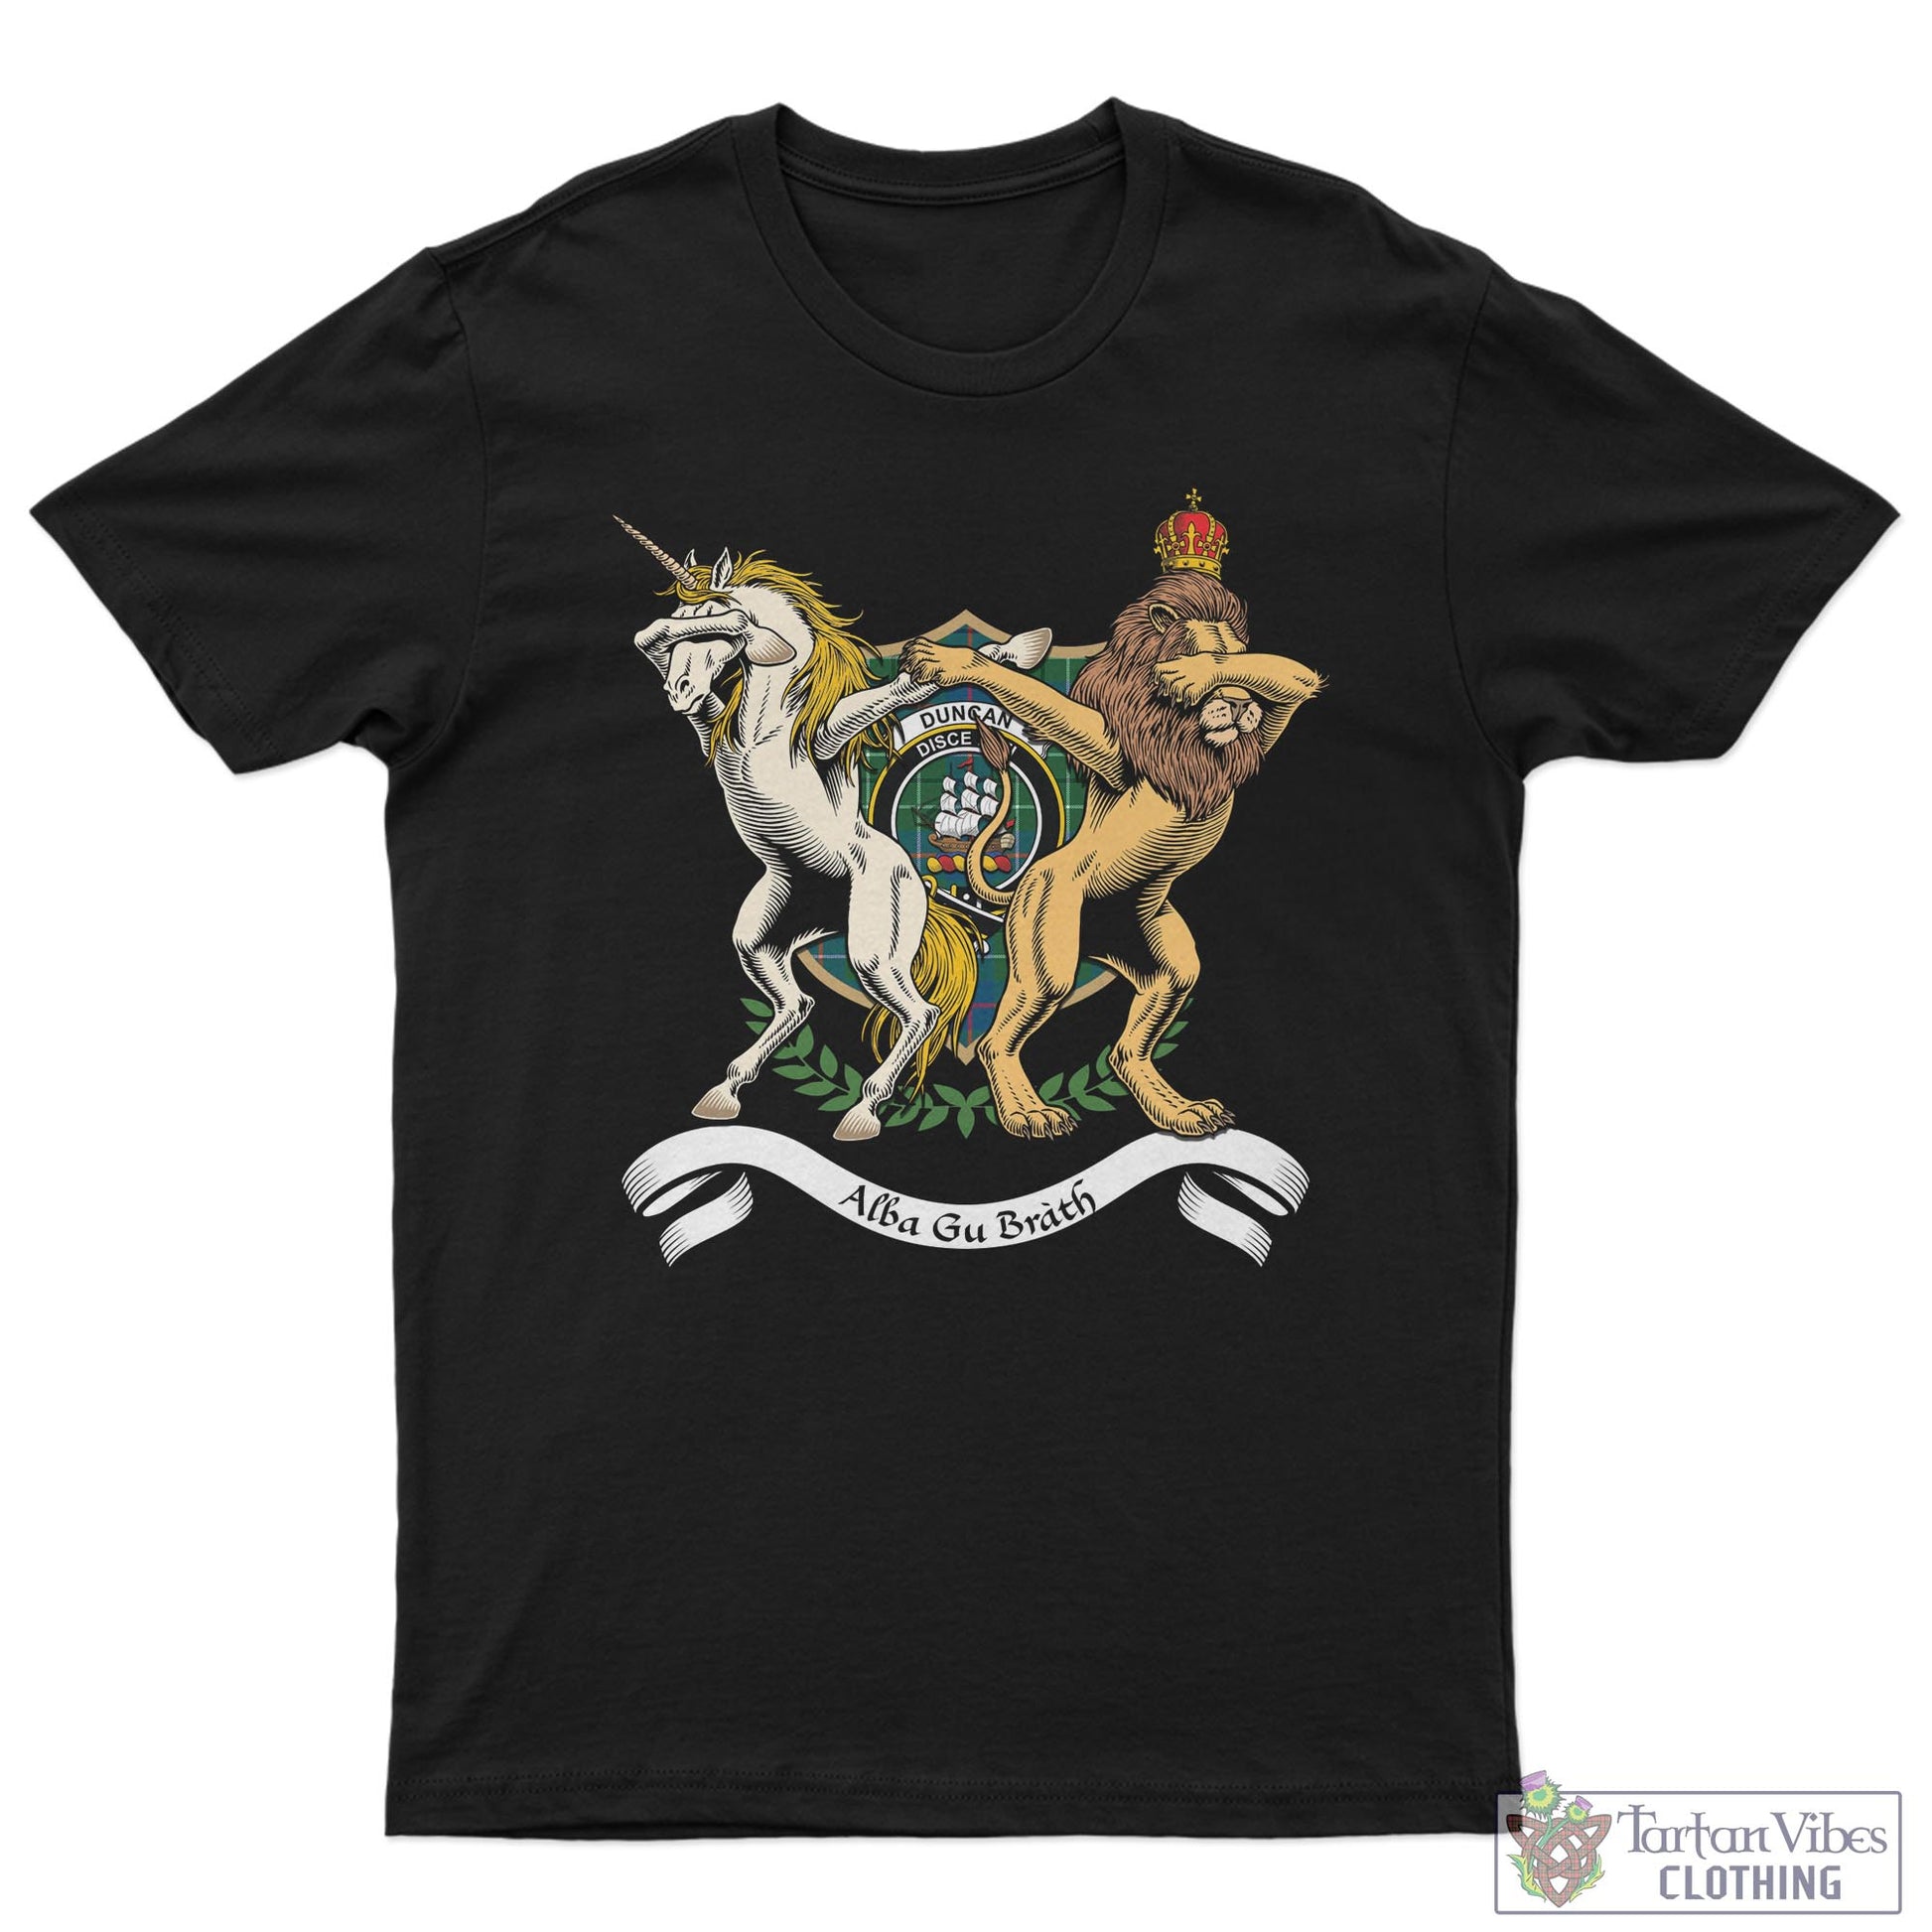 Tartan Vibes Clothing Duncan Ancient Family Crest Cotton Men's T-Shirt with Scotland Royal Coat Of Arm Funny Style